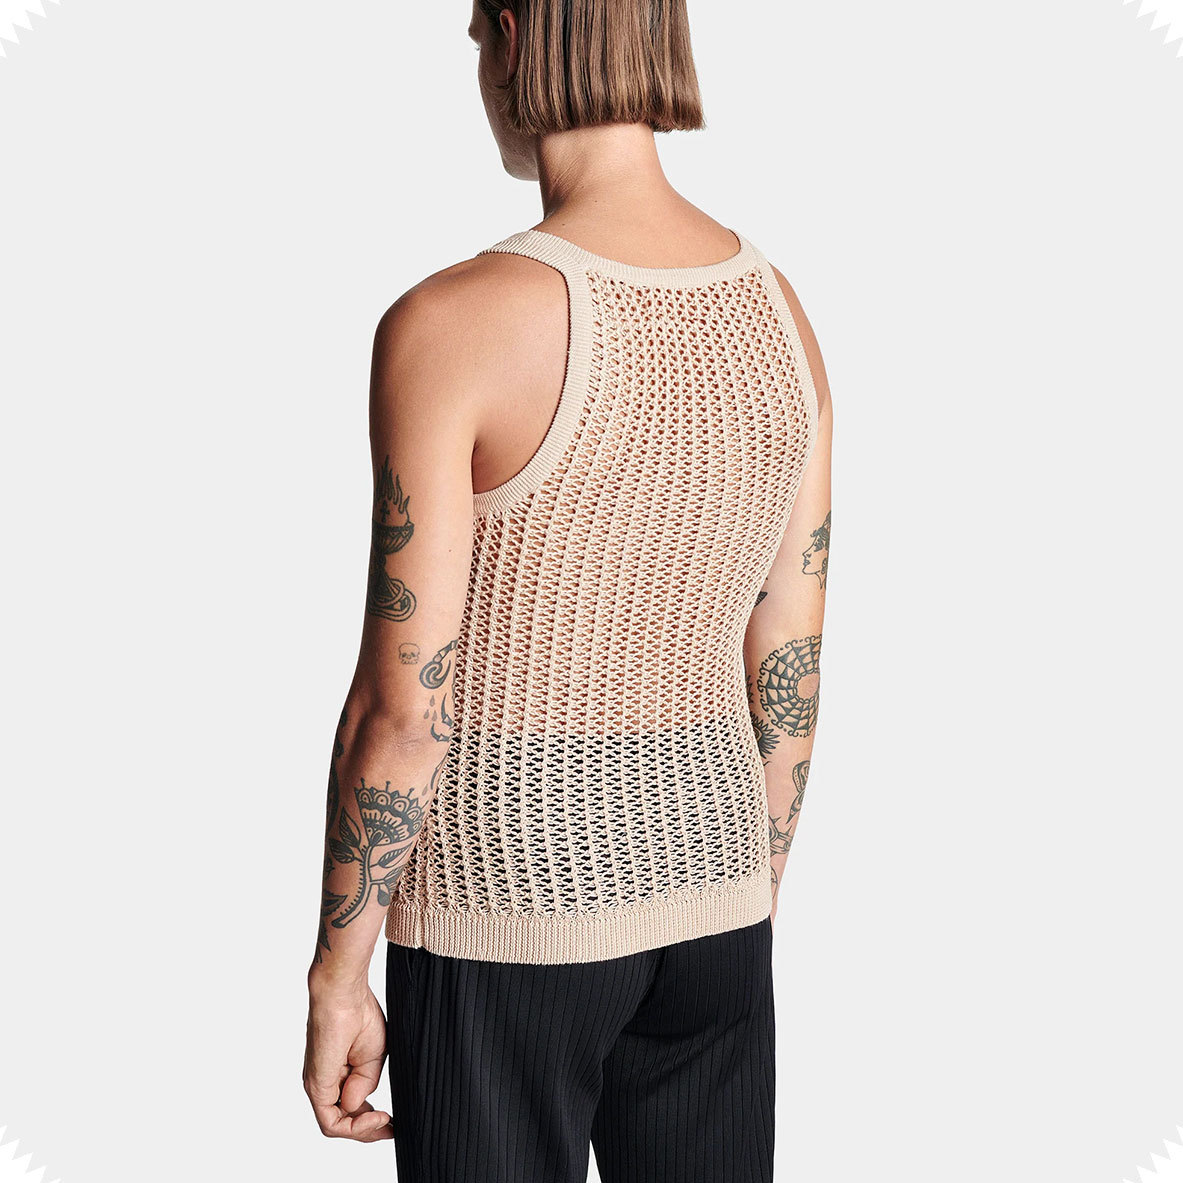 Knitted Sweater See Through Vest